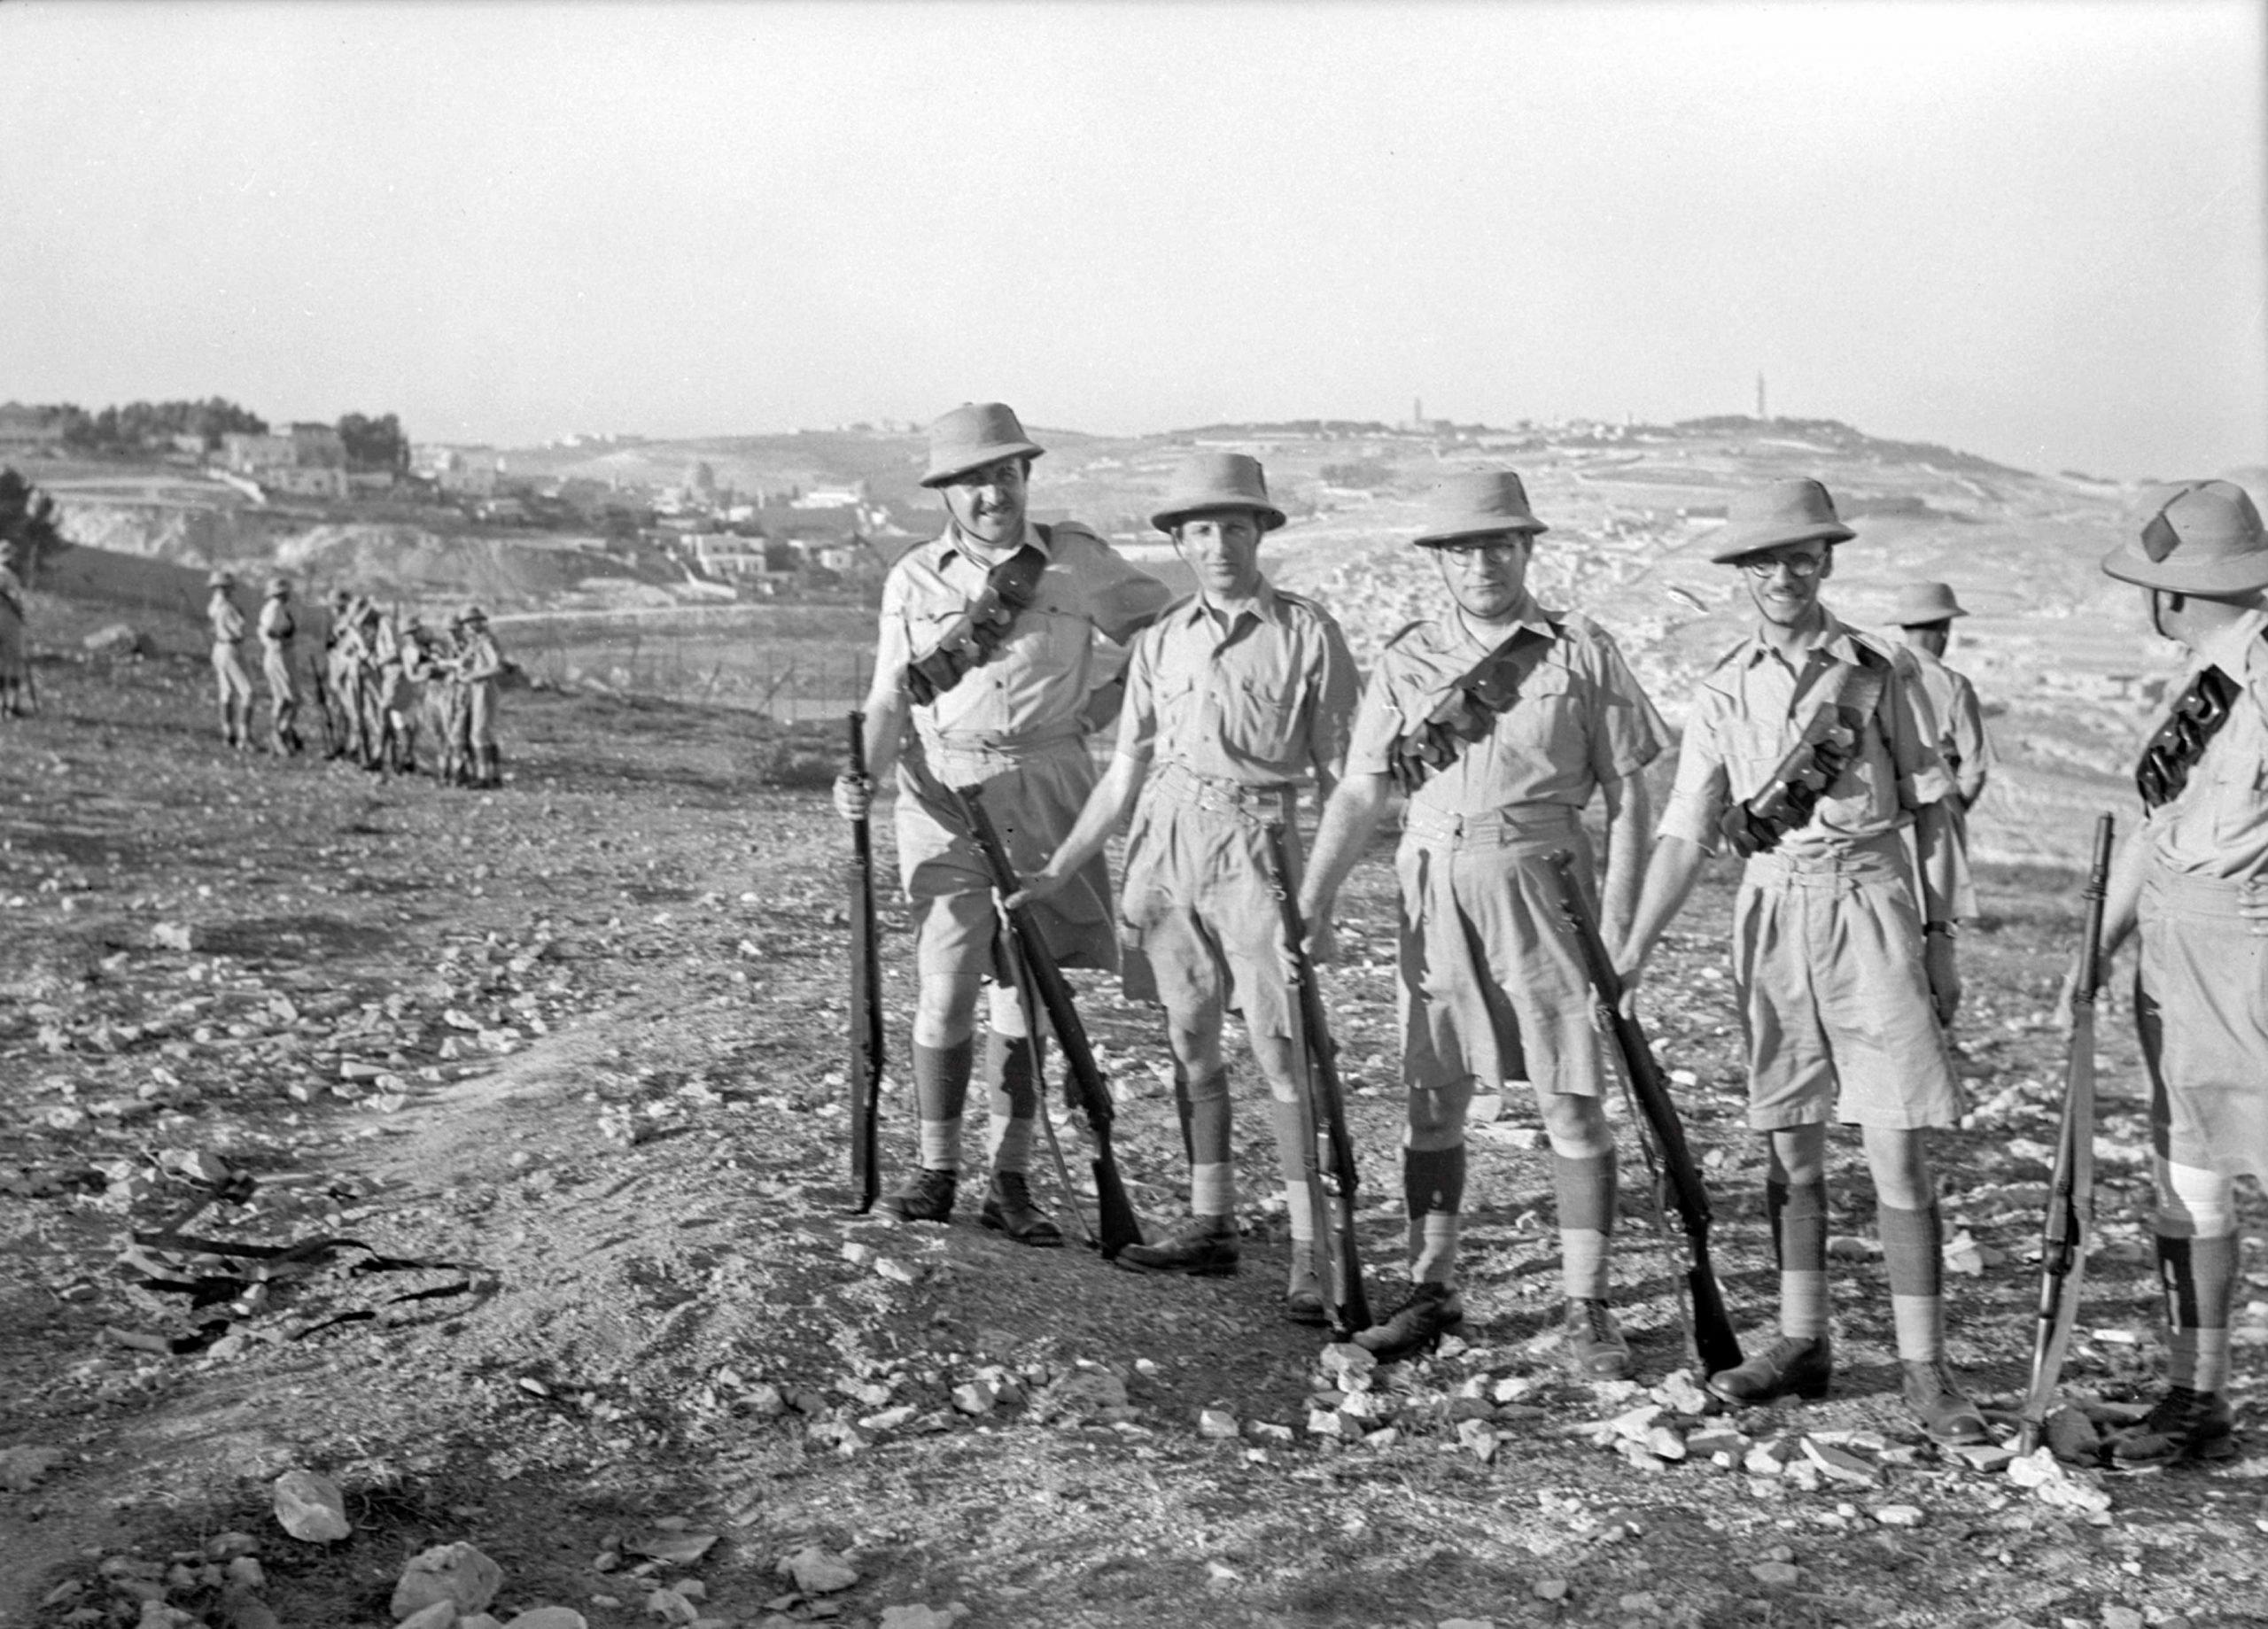 Five soldiers from the 1st Palestine Volunteer Force Company